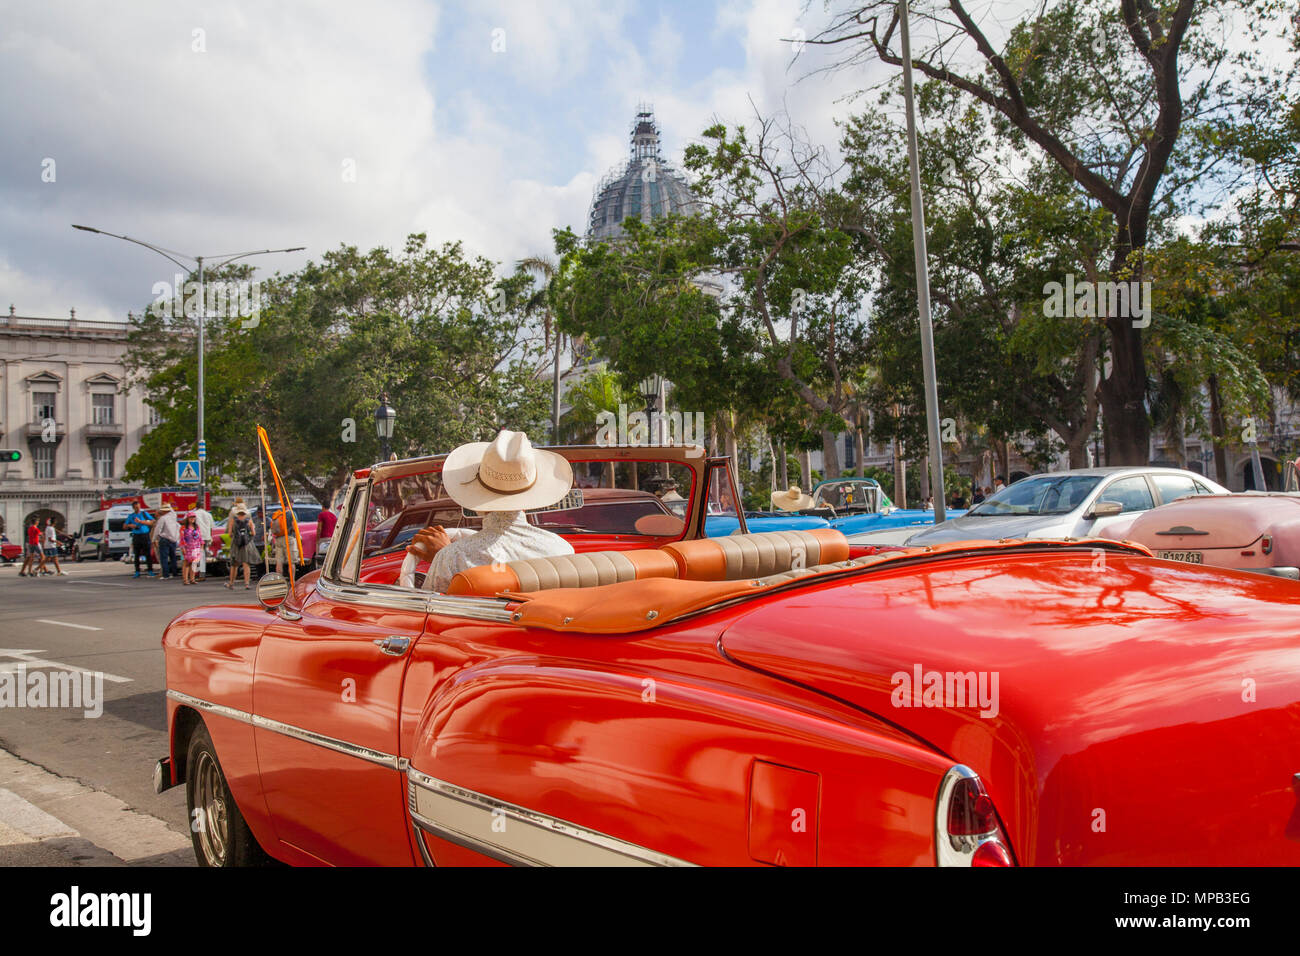 Classic 1950s car in front of the capital building in Old Havana Cuba Stock Photo